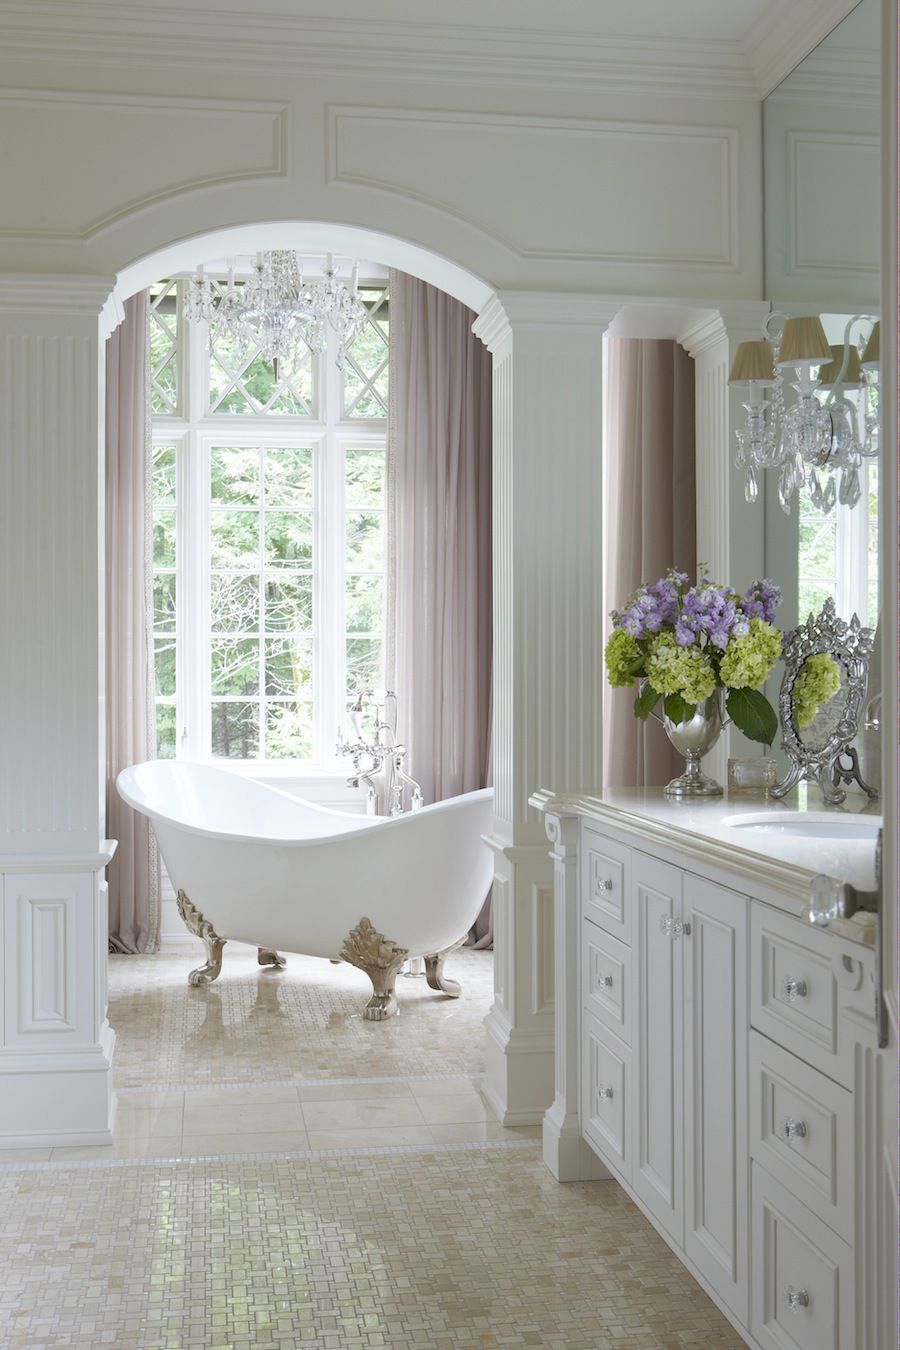 Fabulous & classic bathroom – This pretty claw foot tub sits in a niche with a lovely view!